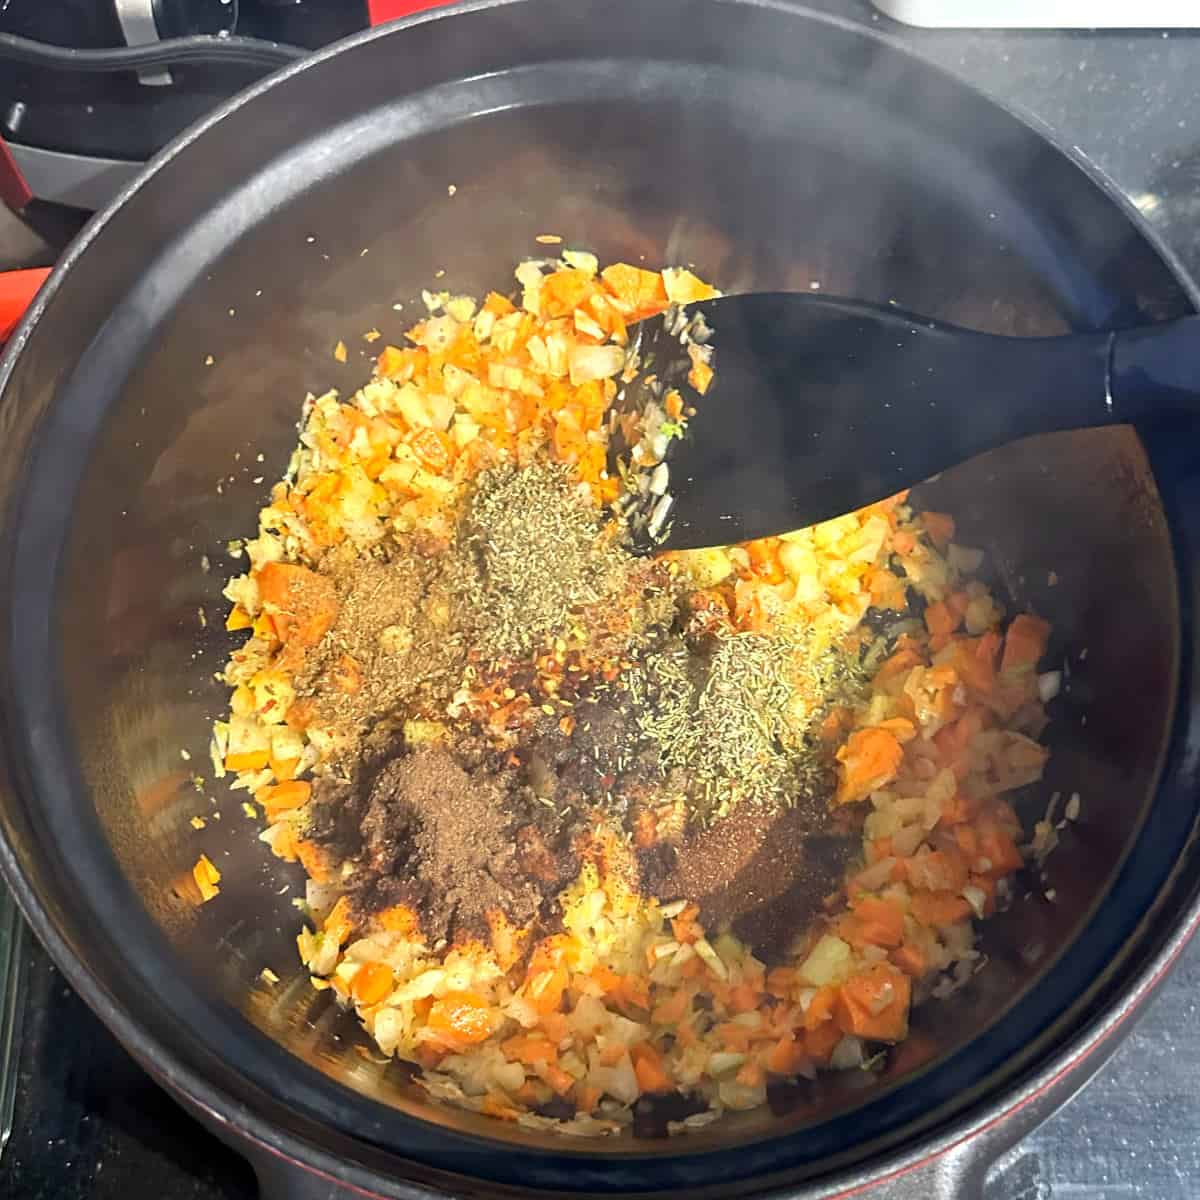 Spices added to crockpot with veggies.